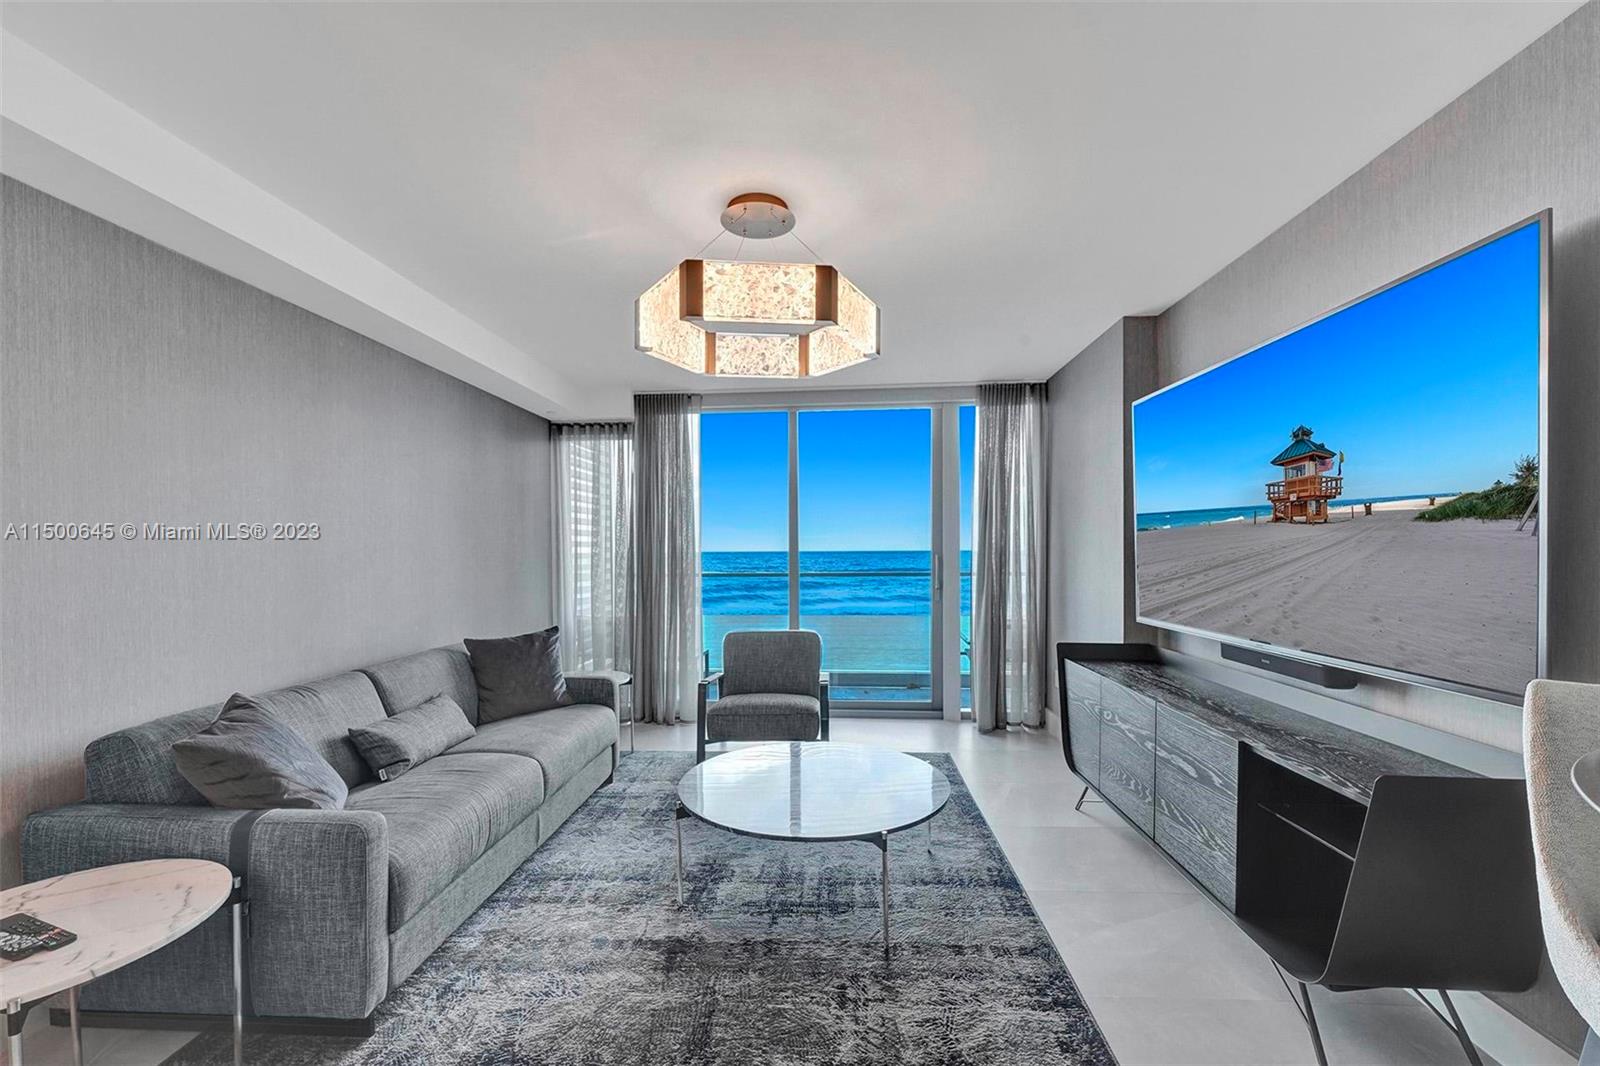 Spectacular Oceanfront Cabana At Residences By Armani. Direct Ocean View. 209 SQft.  Must own a unit in the building to purchase.